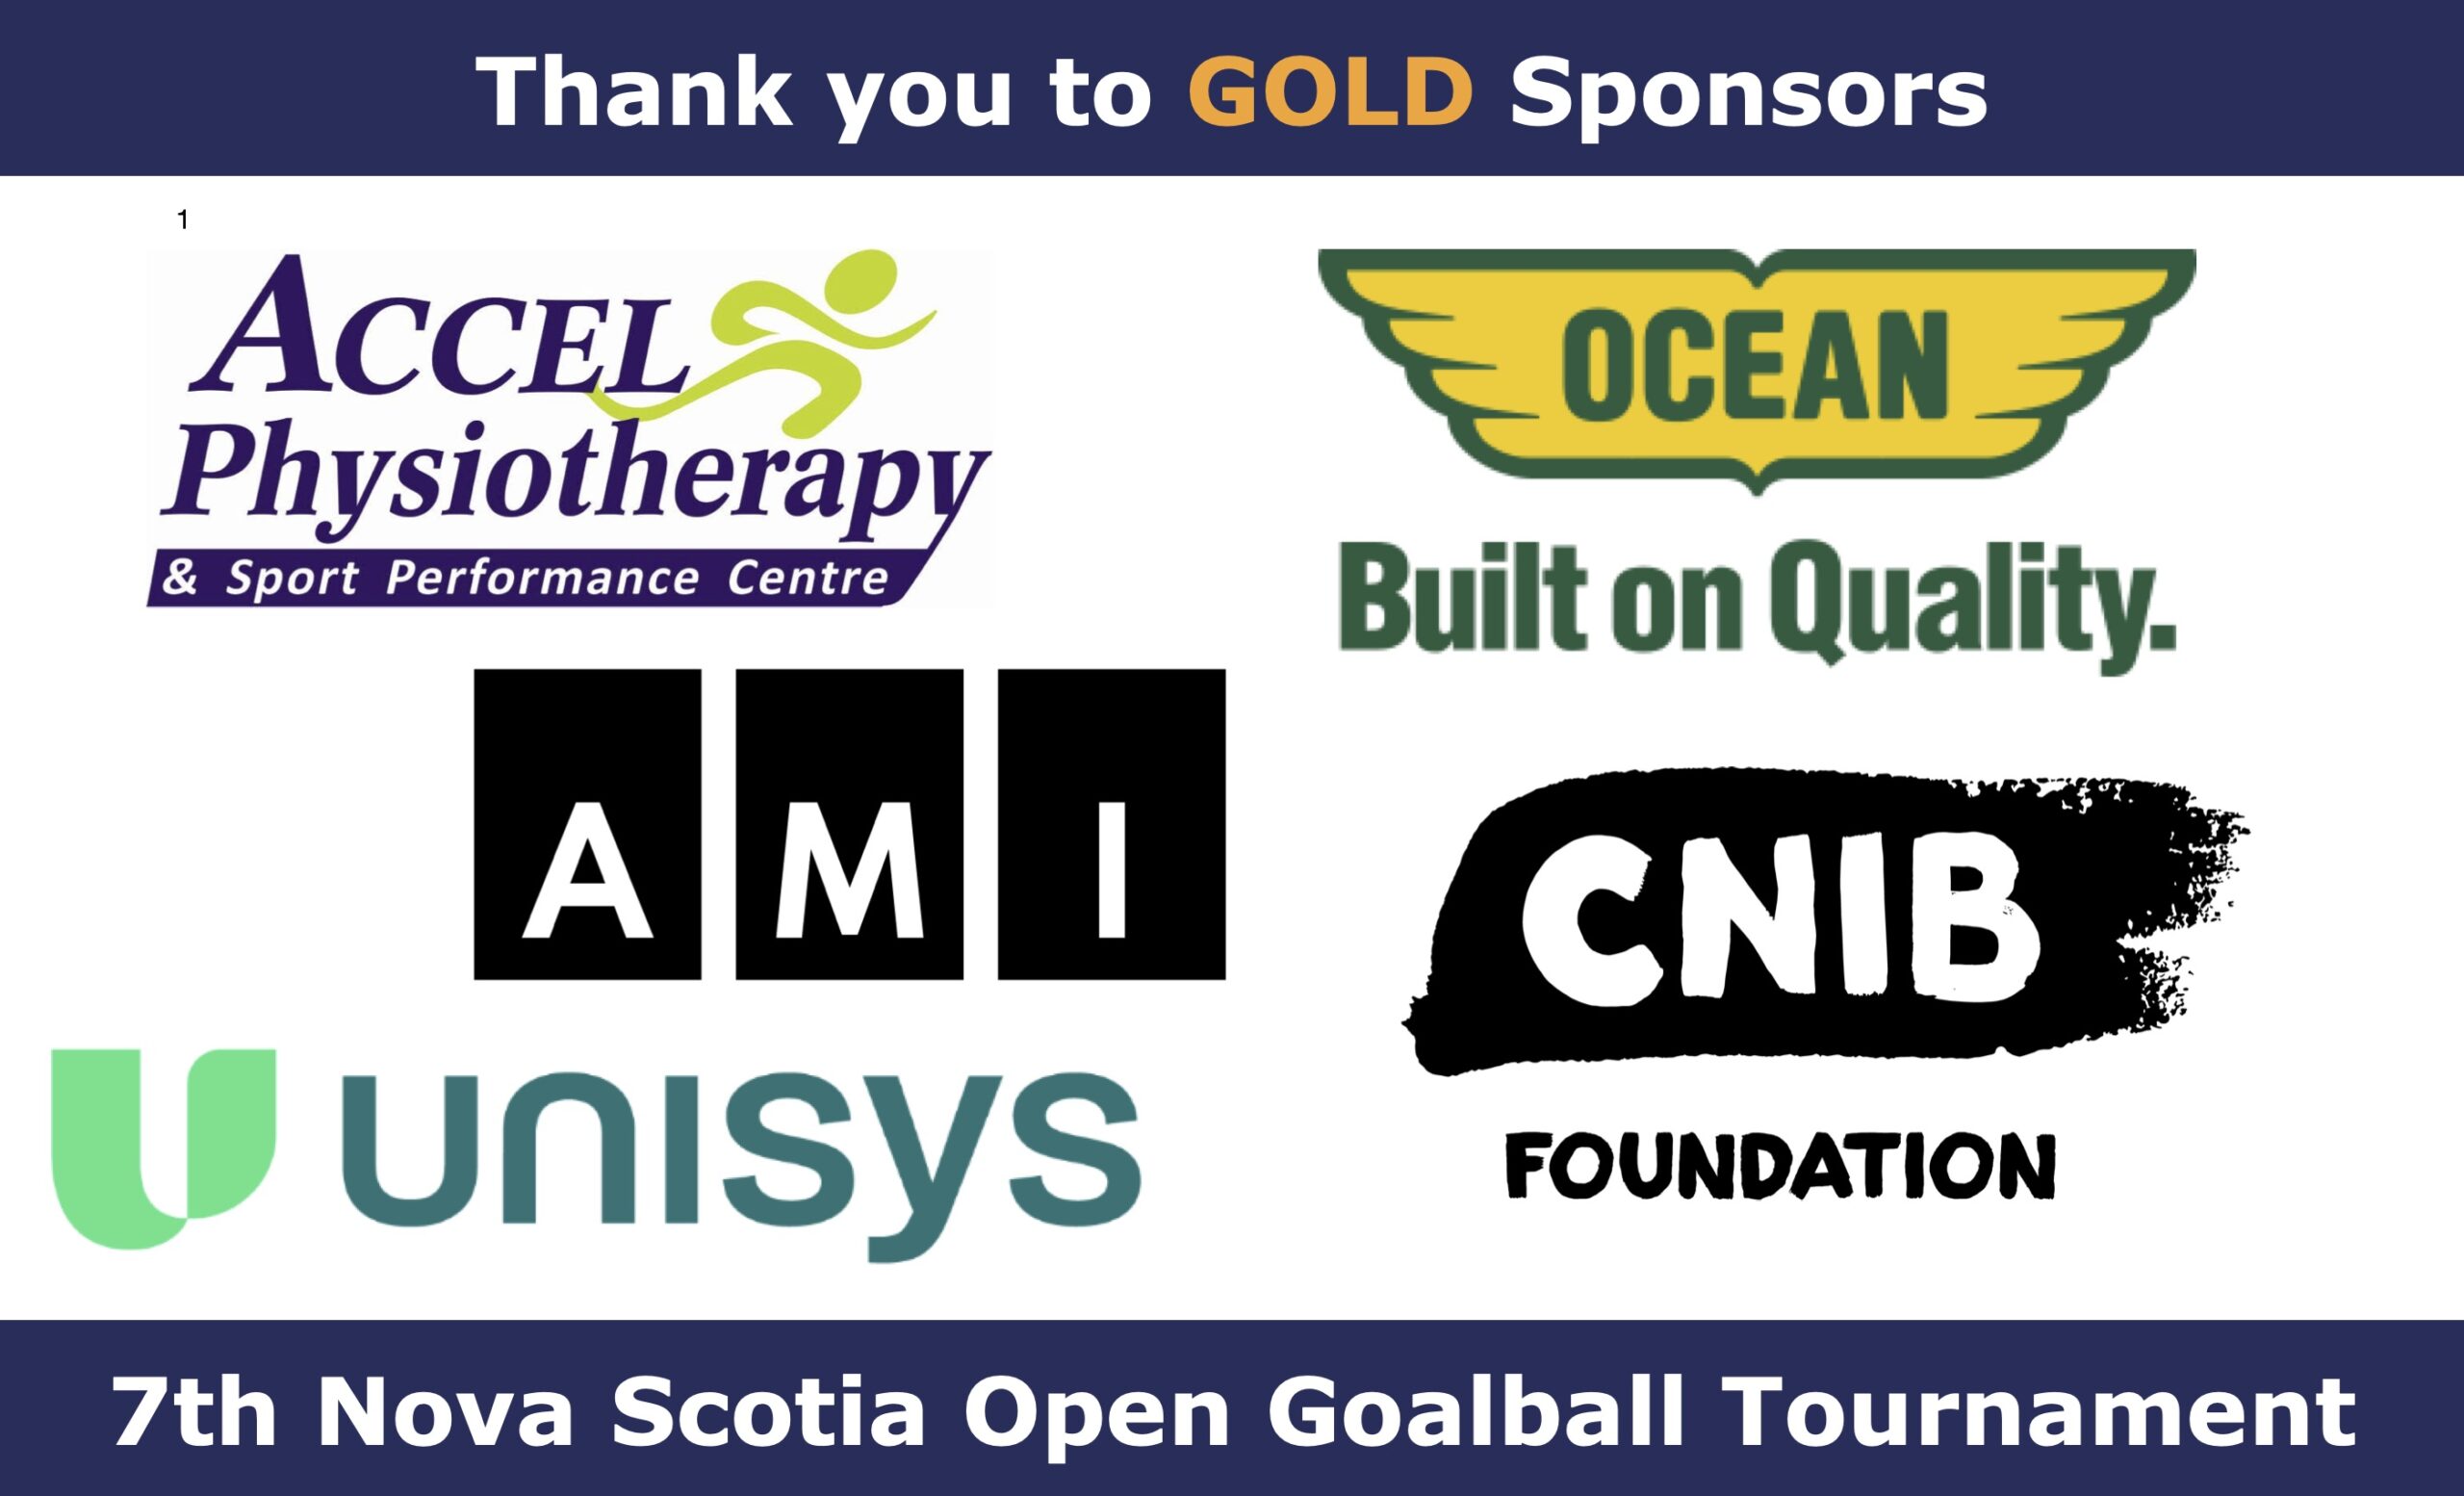 Thank you to gold sponsors. Logos: Accel Physiotherapy & sport performance centre; Ocean Built on Quality; AMI; CNIB Foundation; Unisys. 7th Nova Scotia Open Goalball Tournament